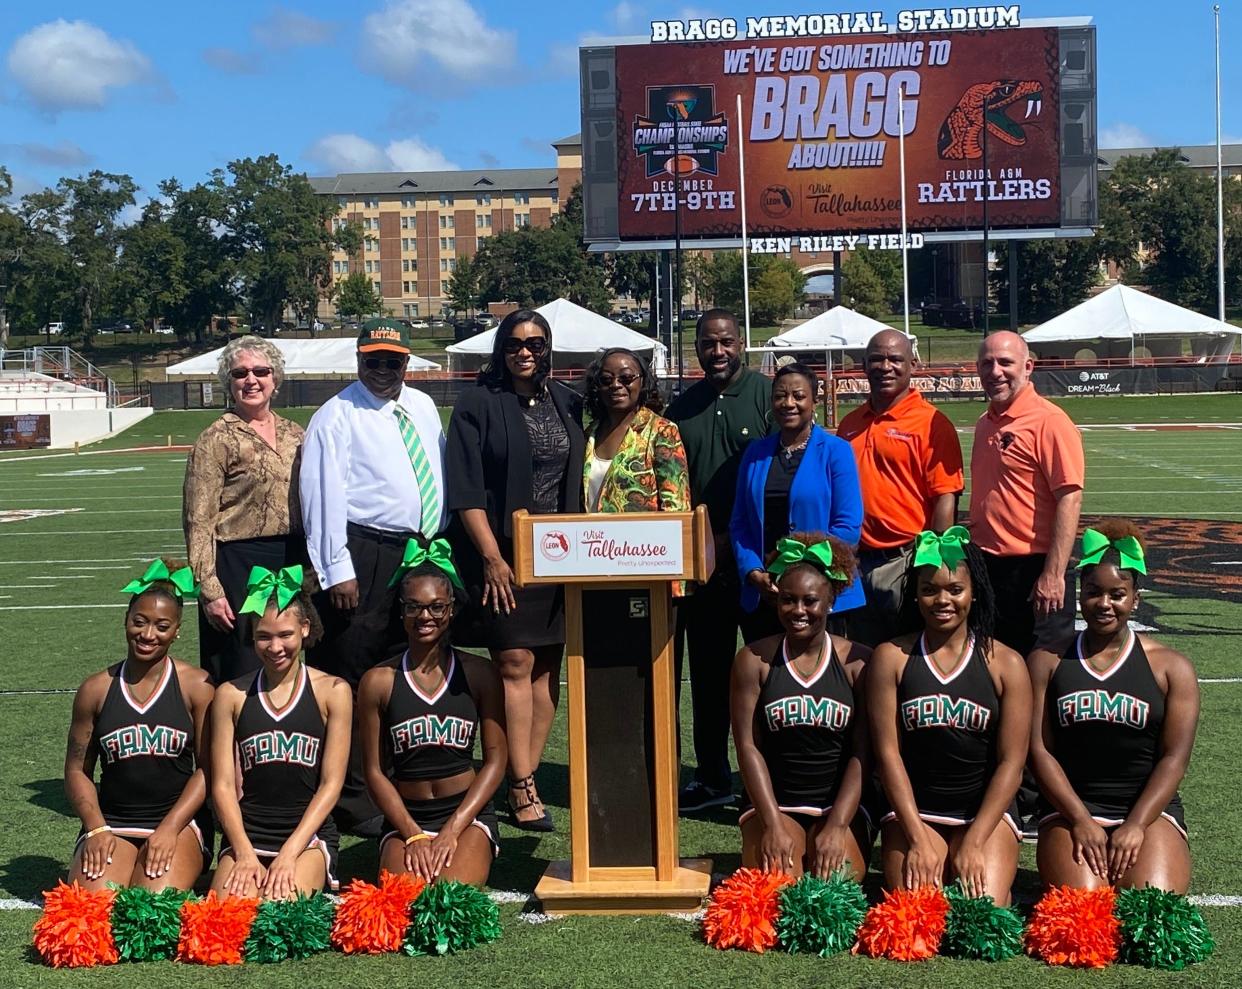 Bragg Memorial Stadium, the home of FAMU’s football team, will host the 2023 FHSAA football state championships